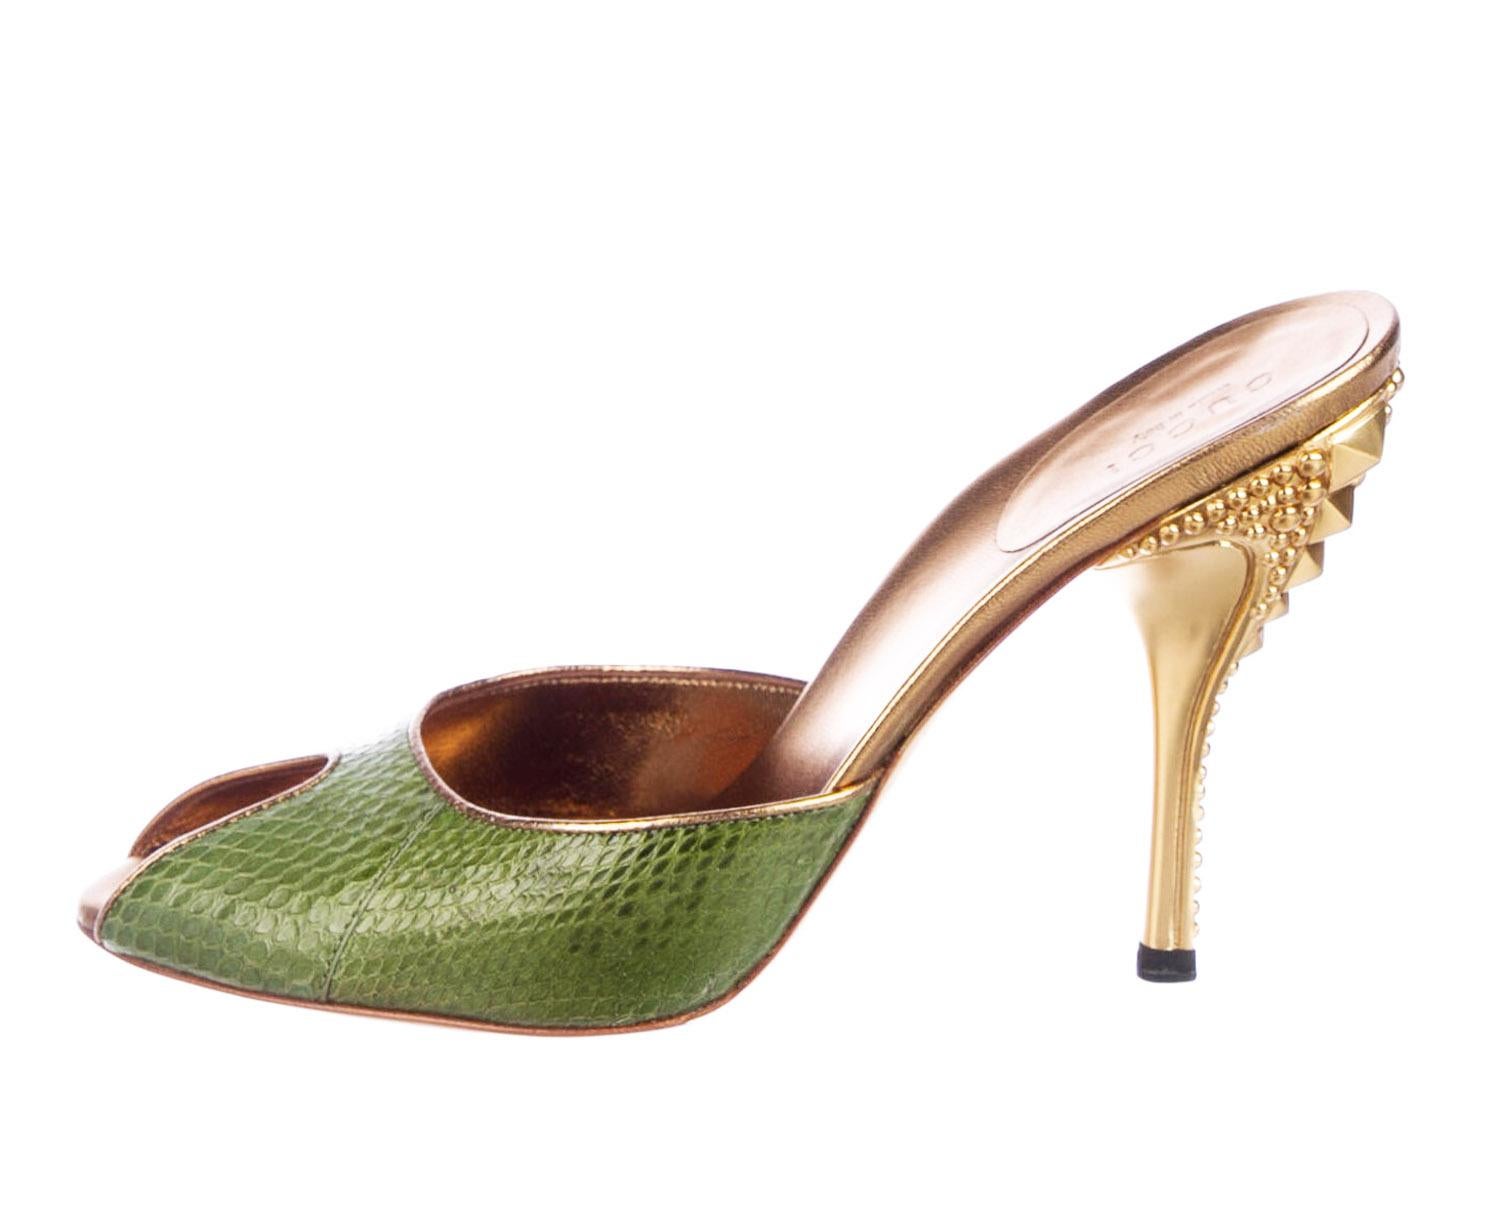 New Tom Ford for Gucci Runway Green / Gold Studded High Heels Mules
Taille de créateur 7 B - Taille italienne 37 B
Couleur du créateur - Vert feuille
Tom Ford's 